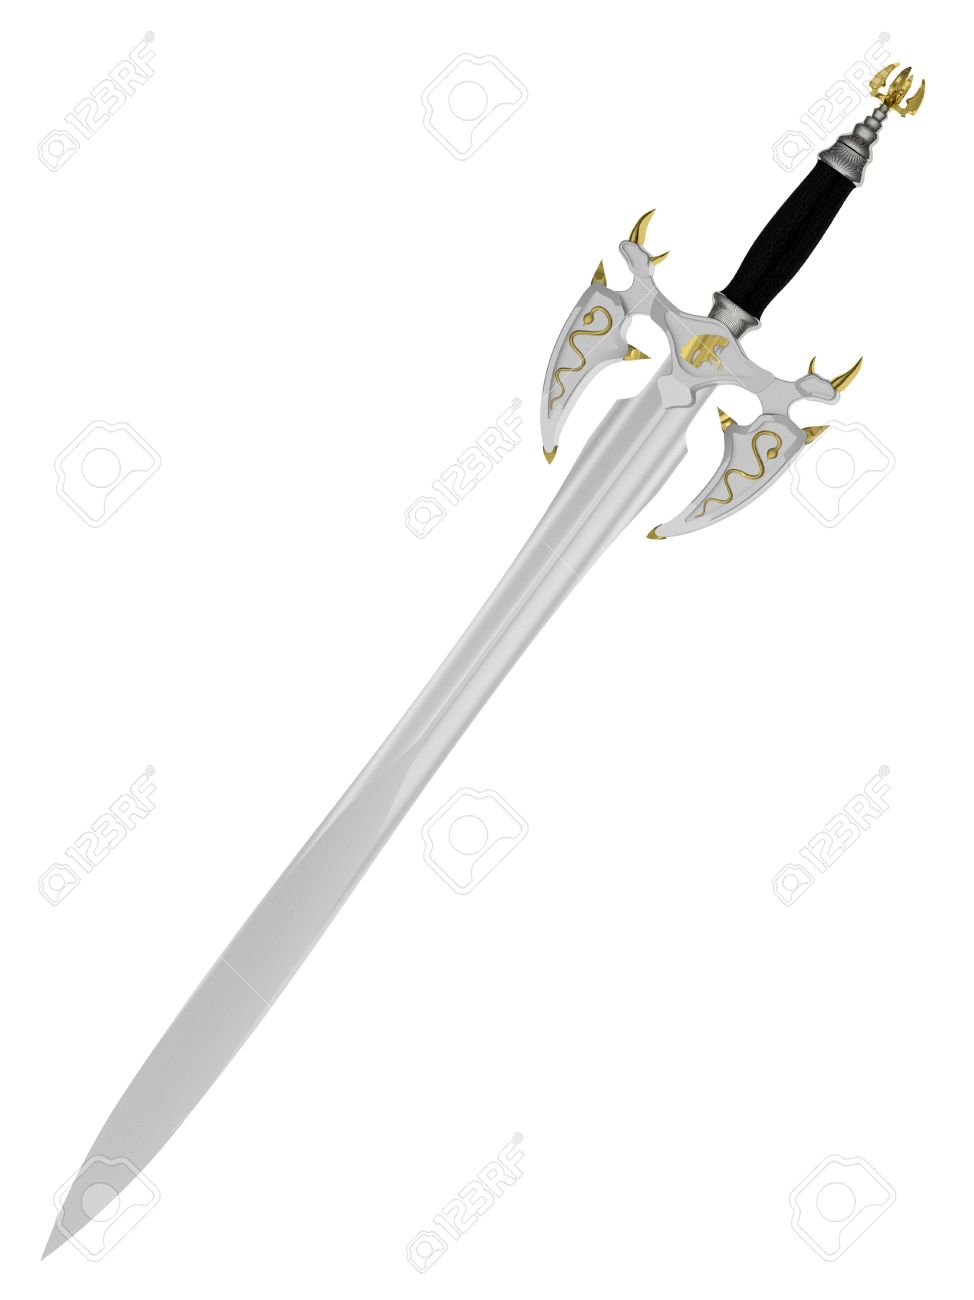 Ancient Gothic Sword With Matted Blade Isolated On White